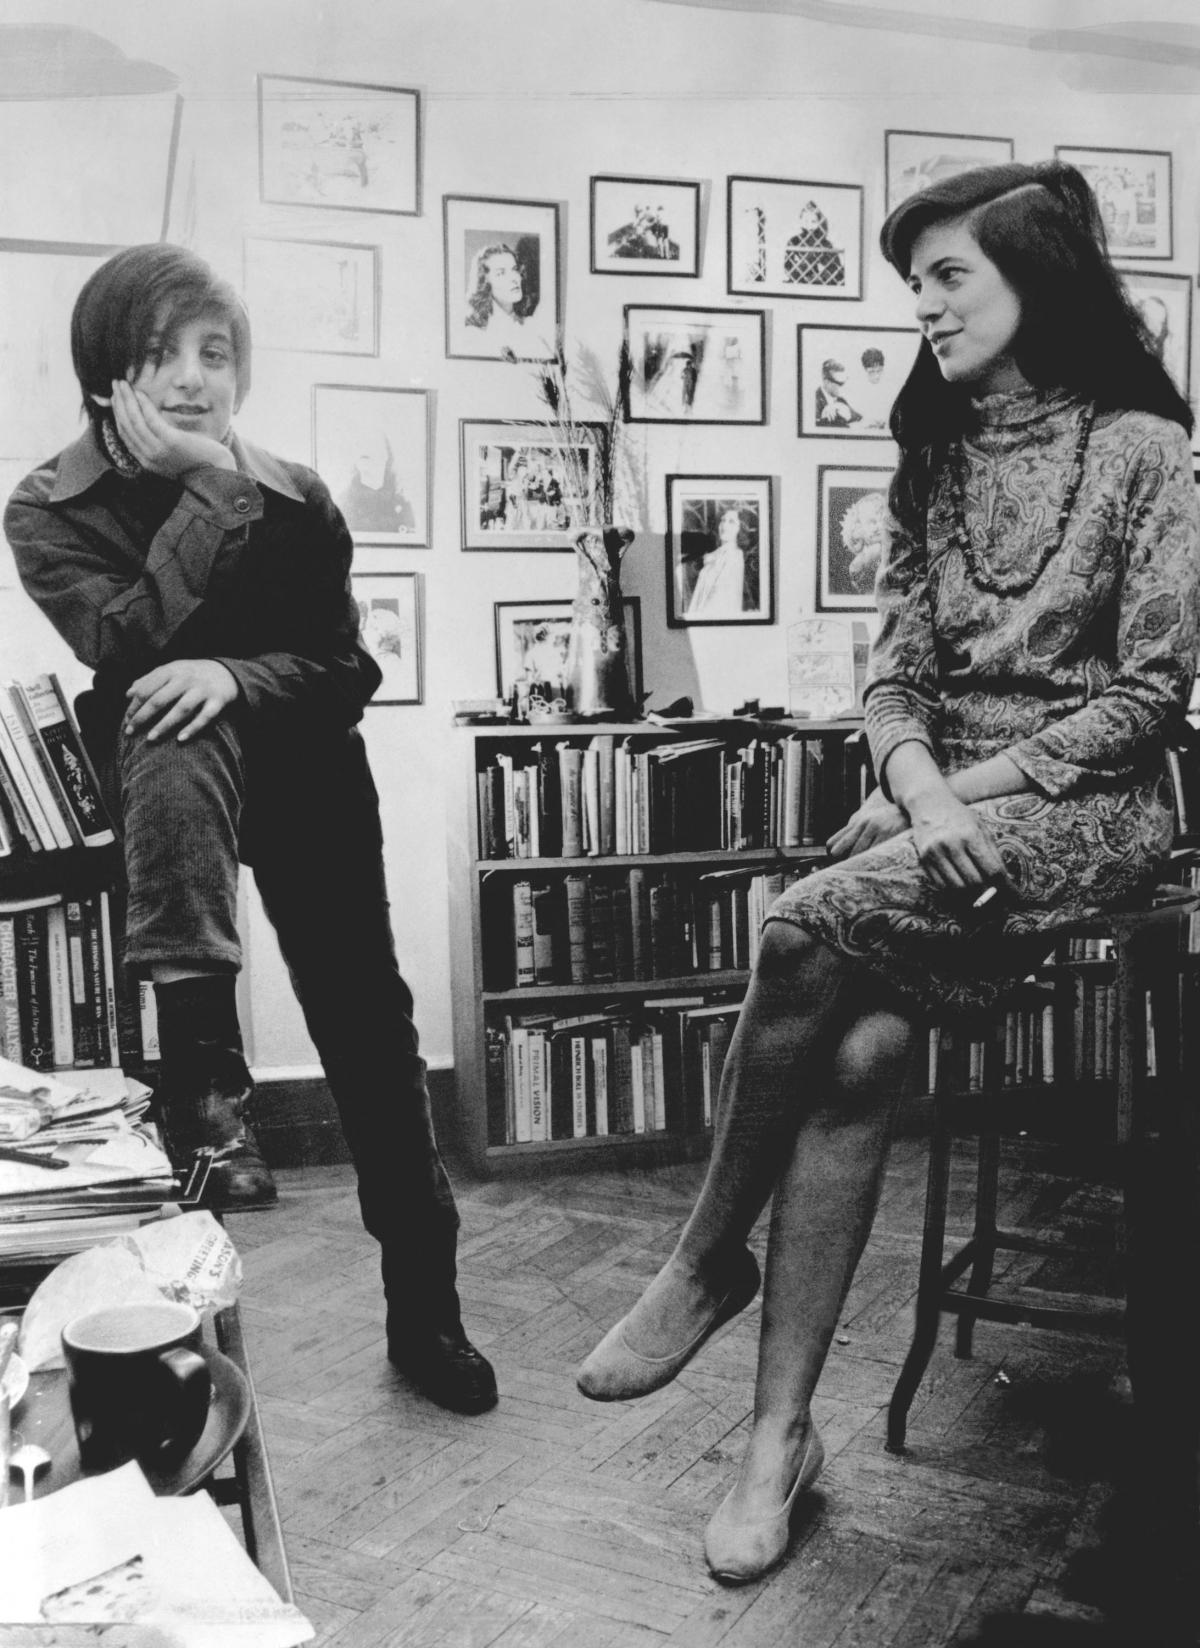 Sontag, seated on a stool, looks at her young son while he rests his hand on his chin